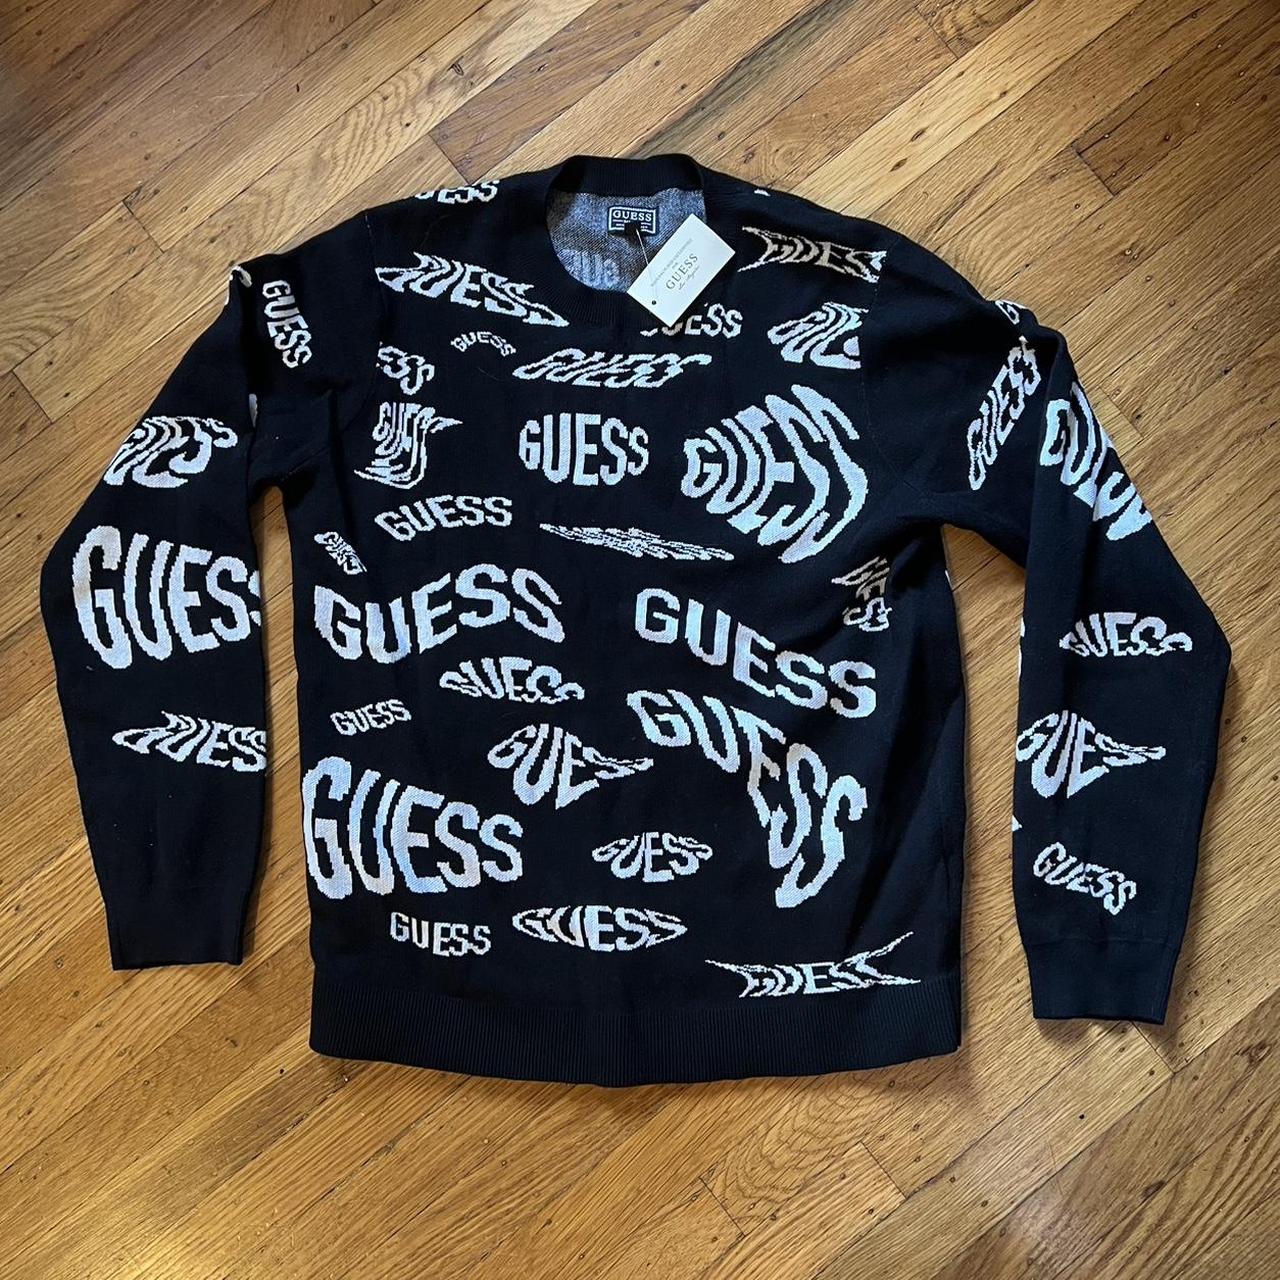 Guess Women's Black and White Jumper